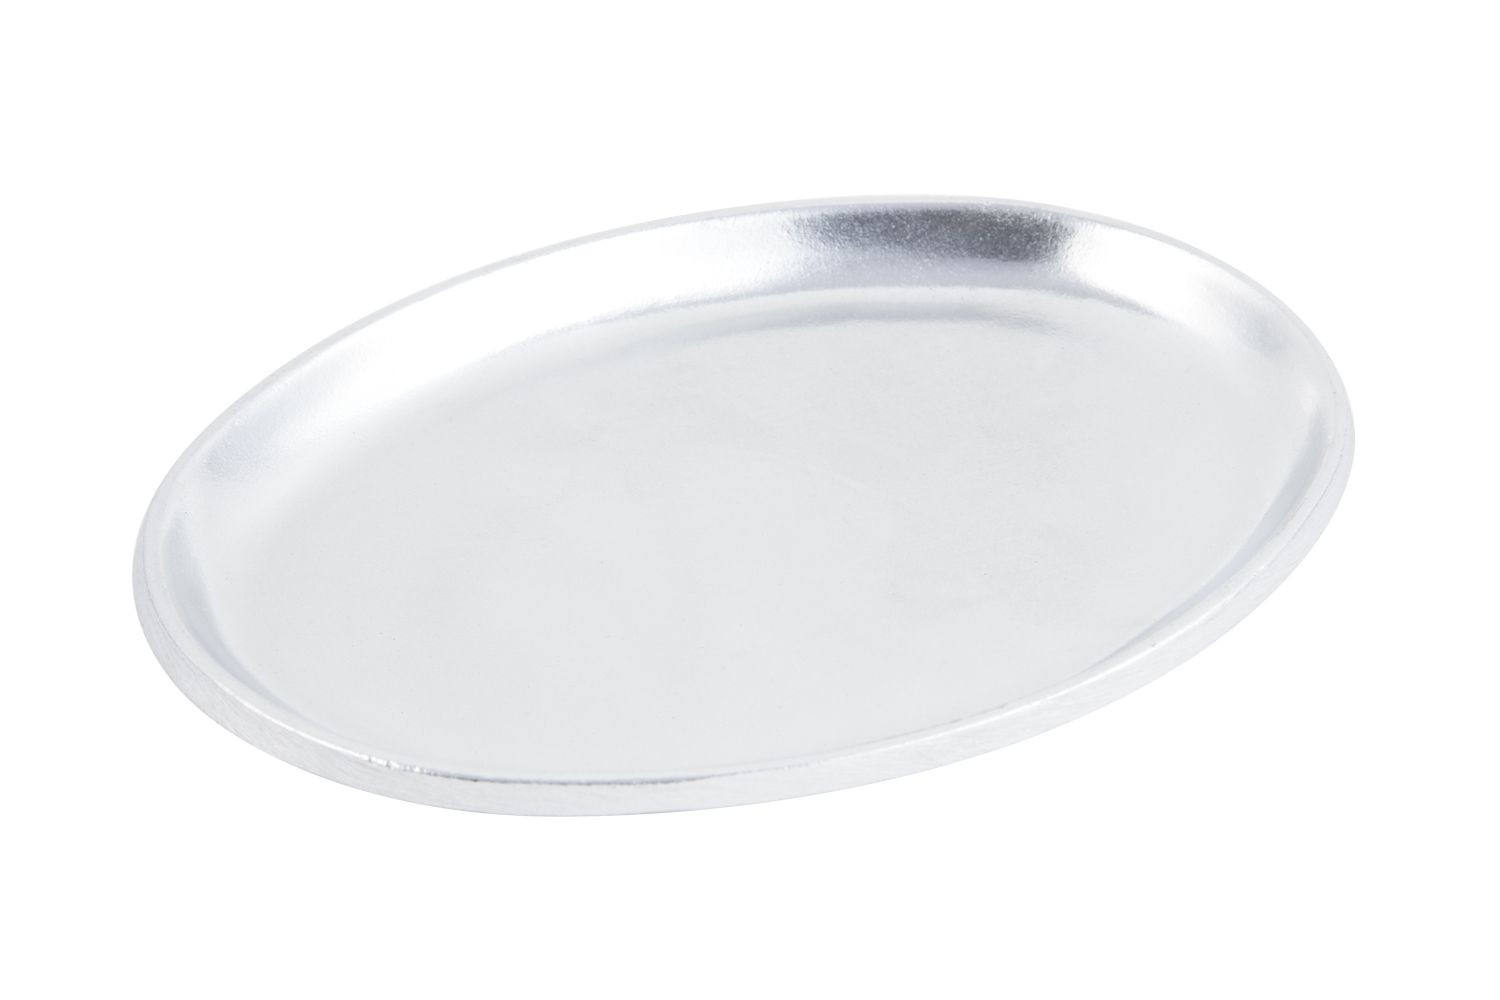 Bon Chef 2003P Oval Serving Platter, Pewter Glo 7 3/4" x 11", Set of 6